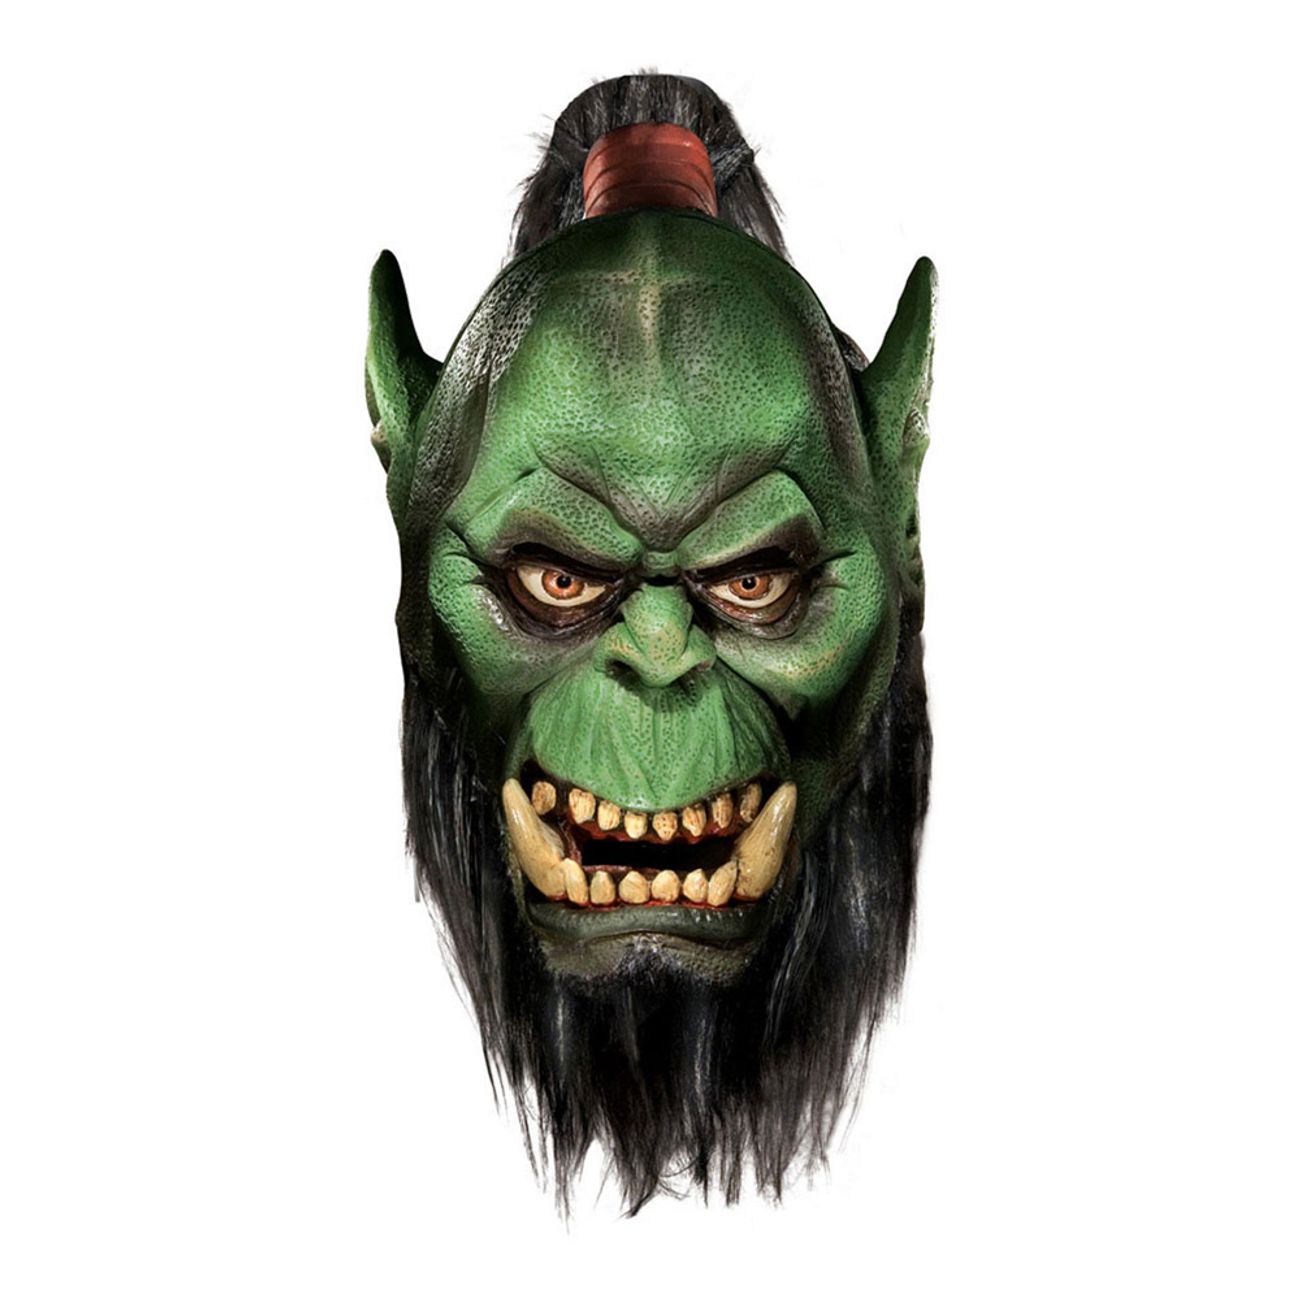 world-of-warcraf-orc-deluxe-mask-1